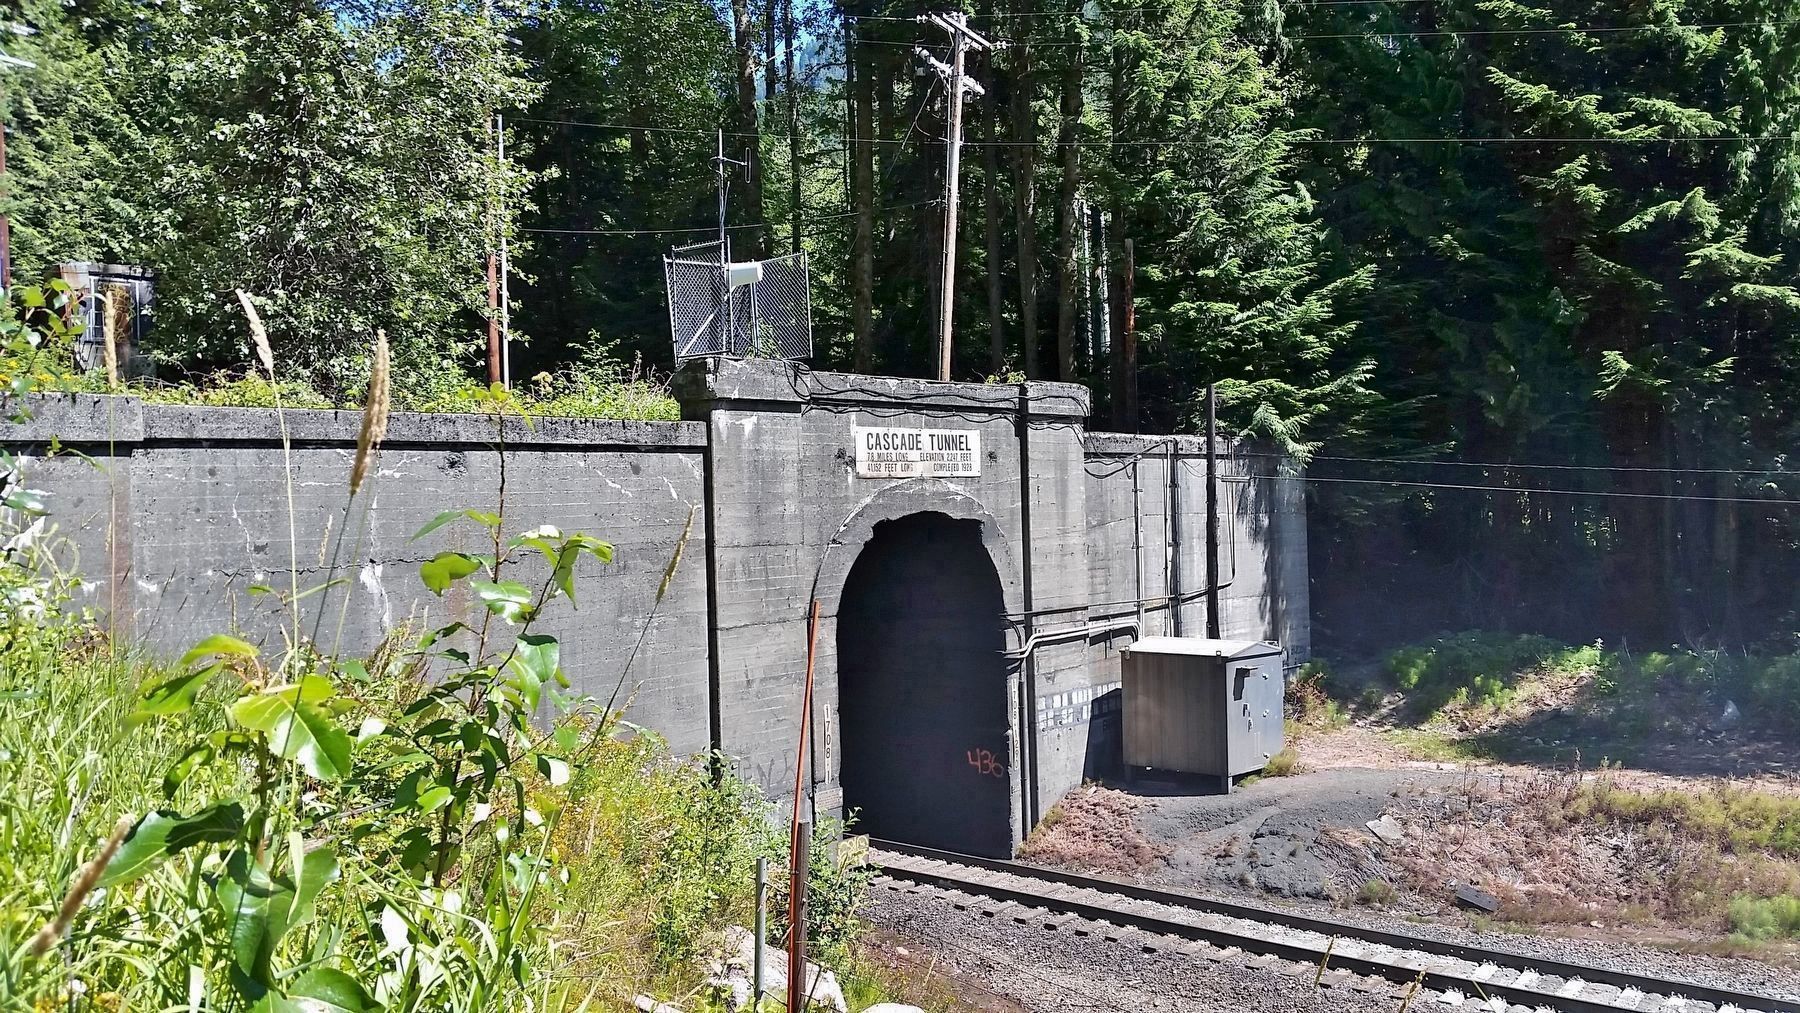 1928 Cascade Tunnel (<i>west portal view from Old Cascade Highway</i>) image. Click for full size.